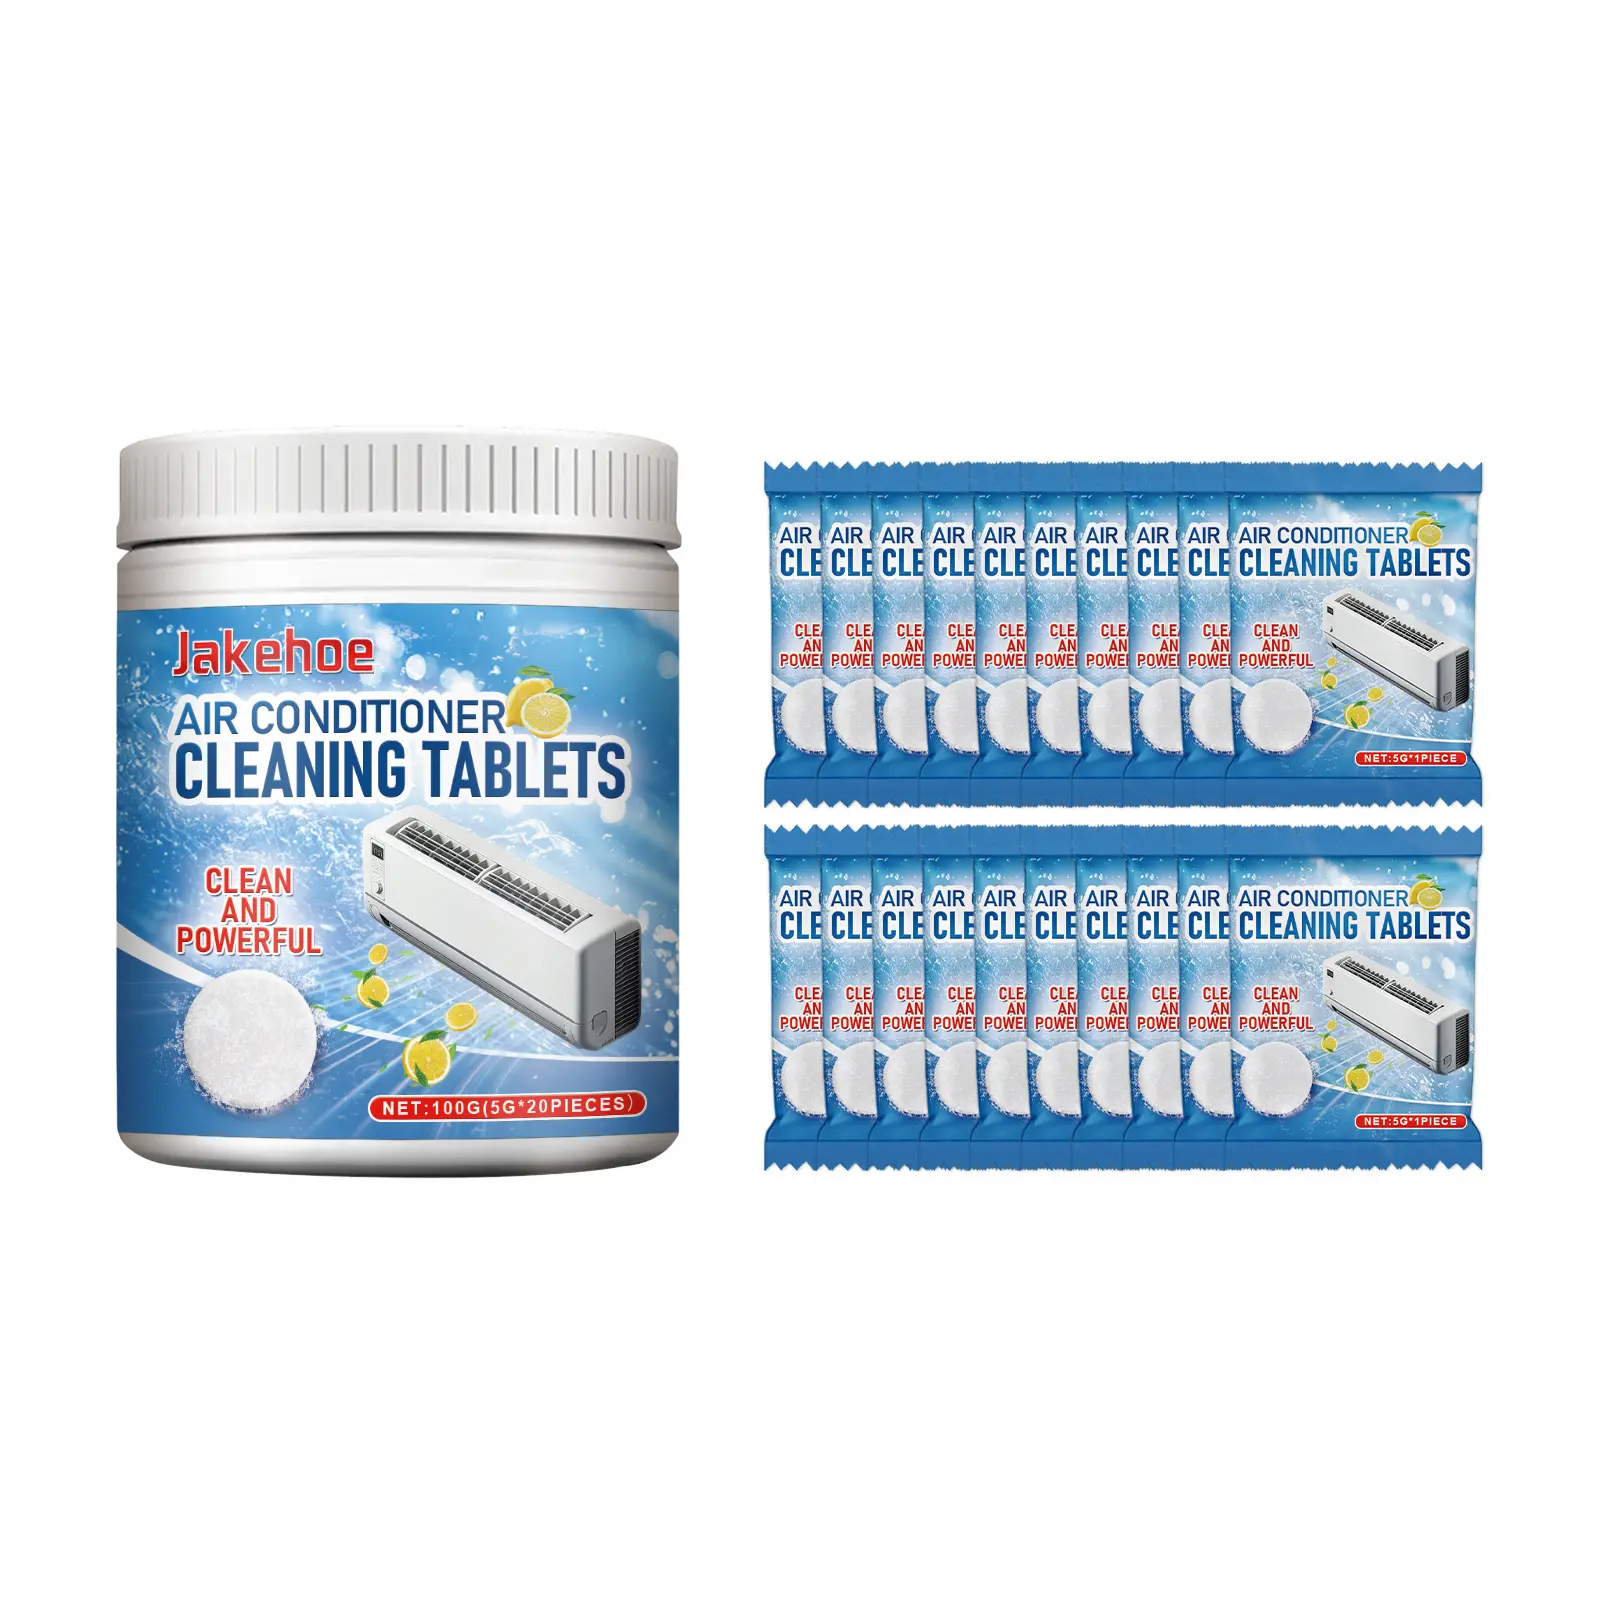 Air conditioner Cleaning Tablets cleaning sterilization deodorization efficient cleaning